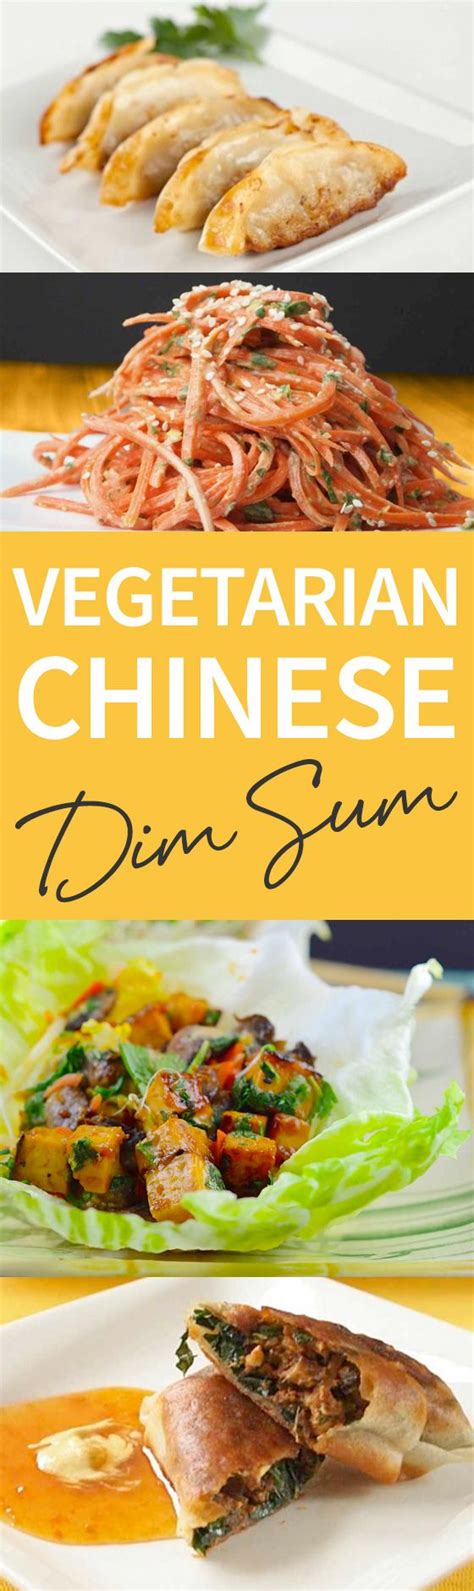 White mushroom can be substituted with the following items: Vegetarian Chinese Dim Sum | Vegetarian dim sum, Vegetarian, Vegetarian recipes